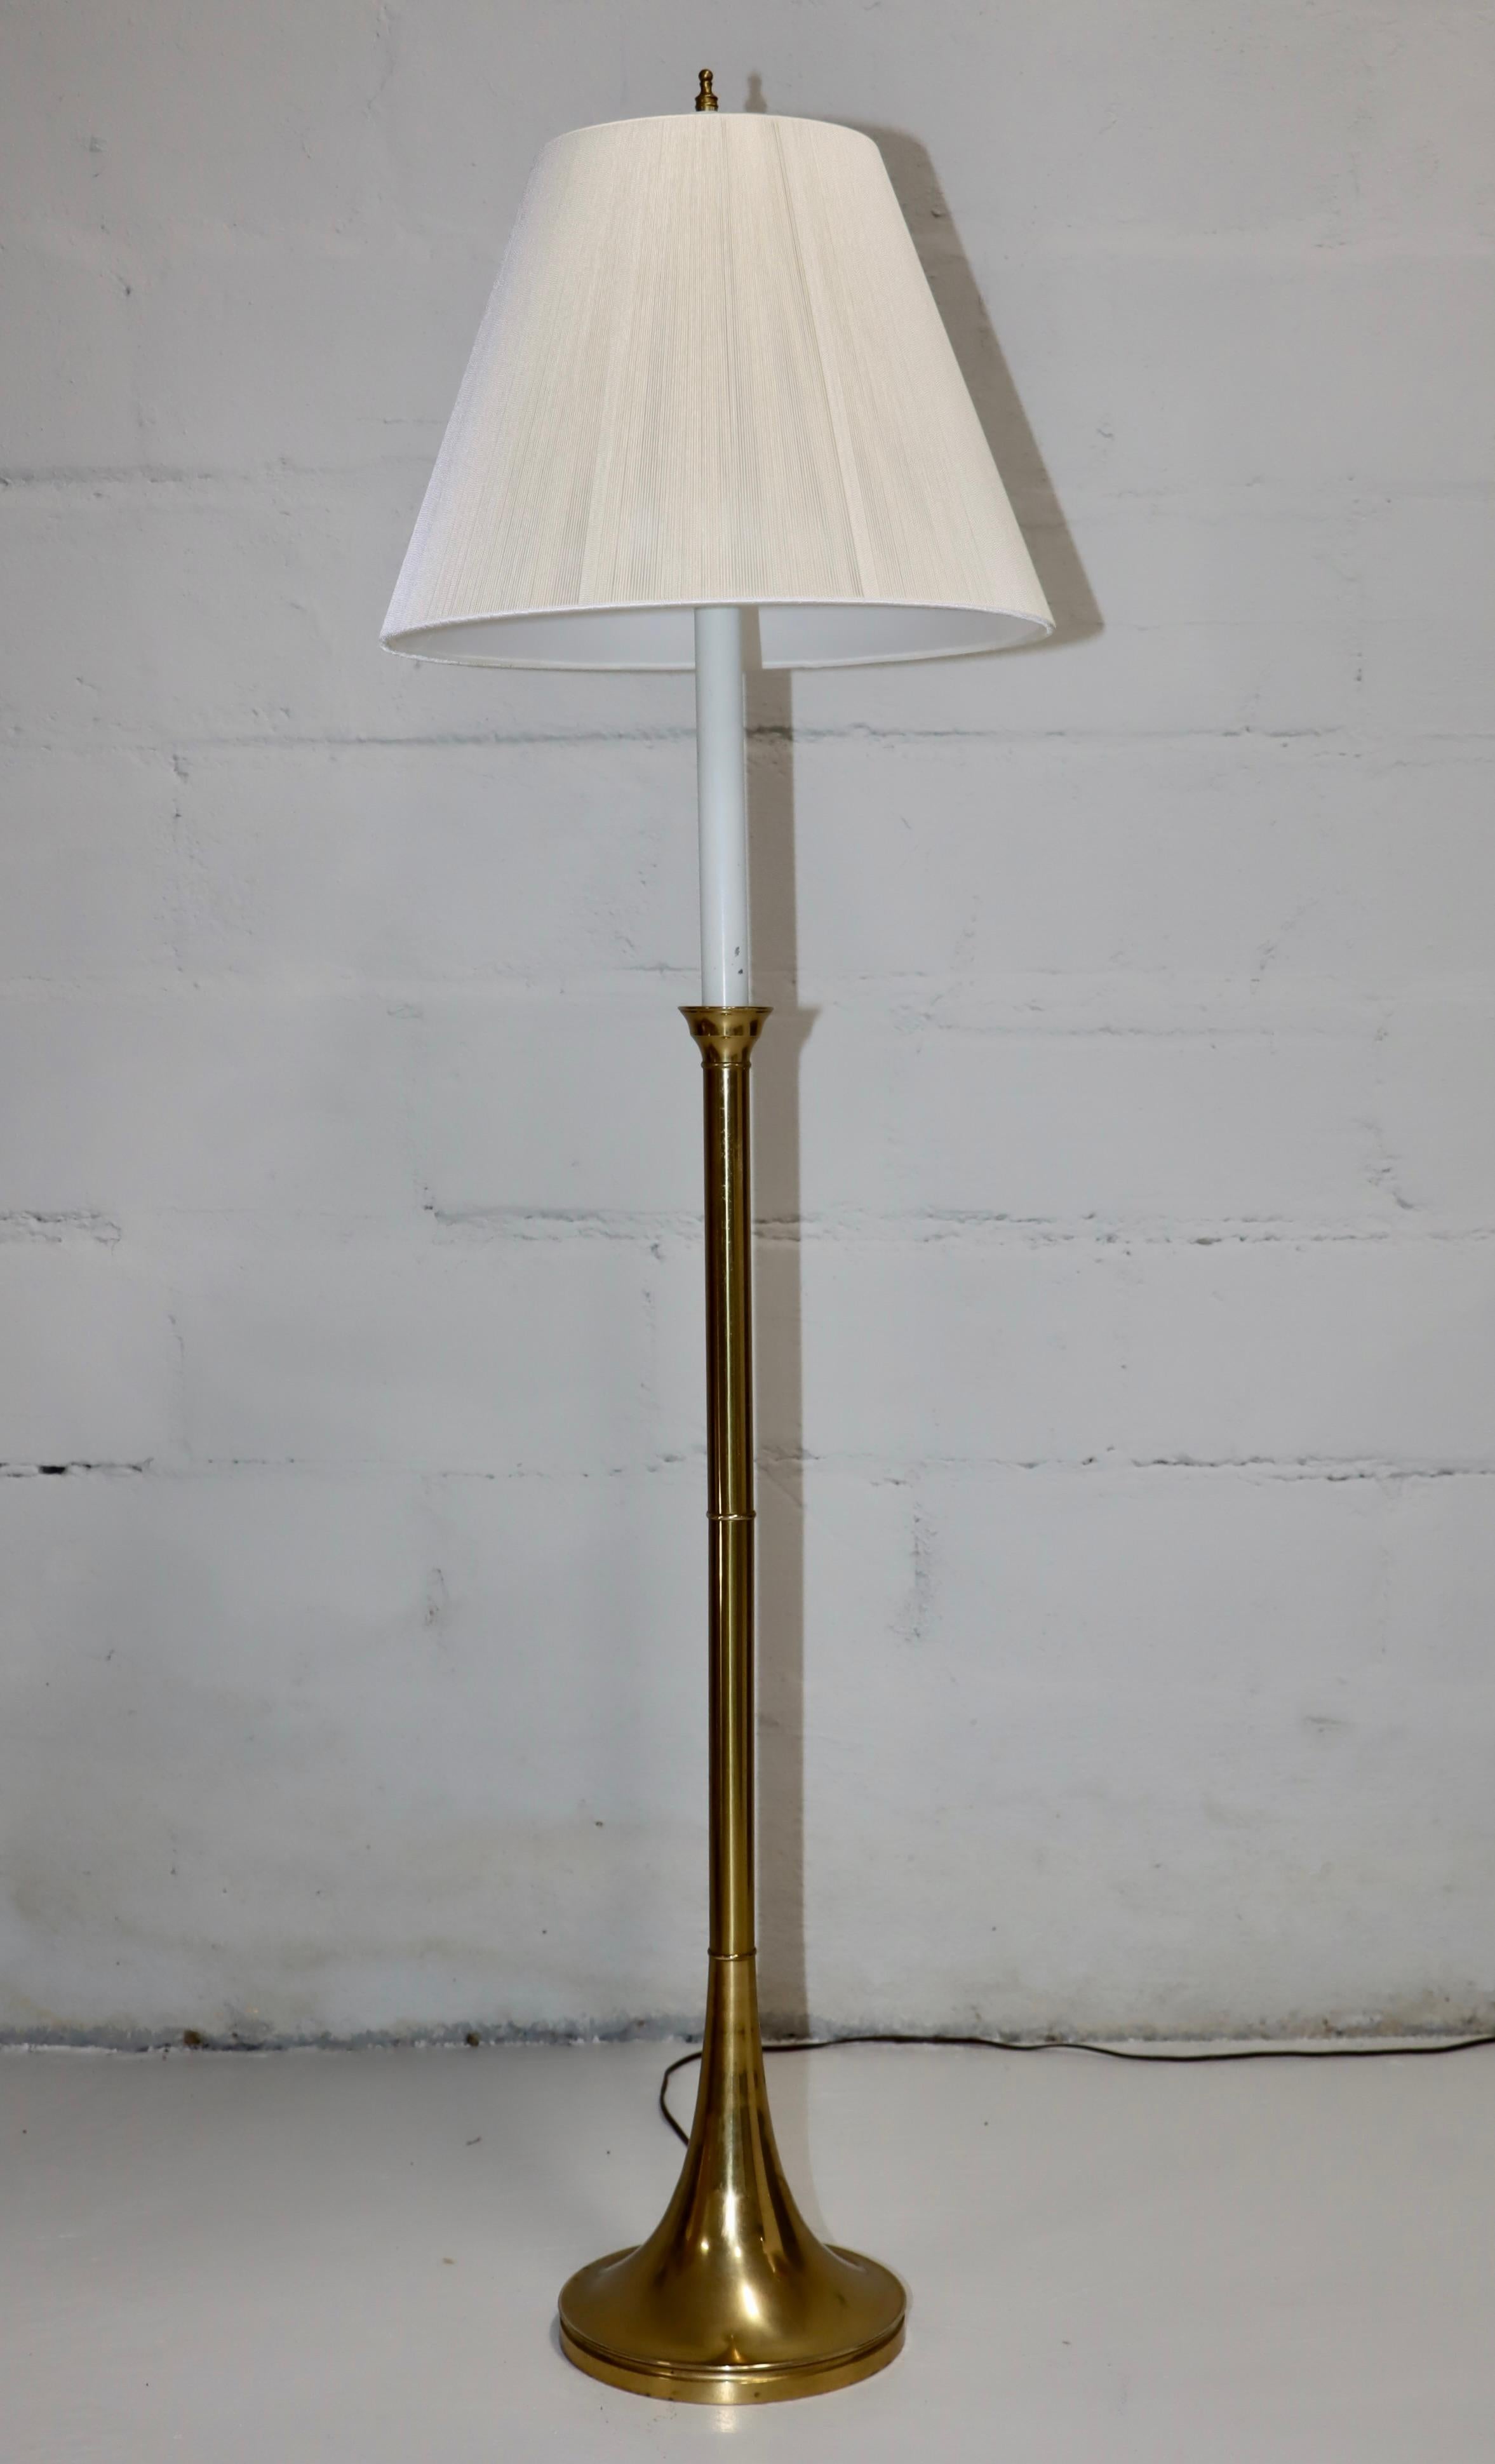 1970's mid-century modern brass floor lamp by Warren Kessler with custom made silk string shade, in vintage original condition with some wear and patina to the brass due to age and use, newly rewired and ready to use.